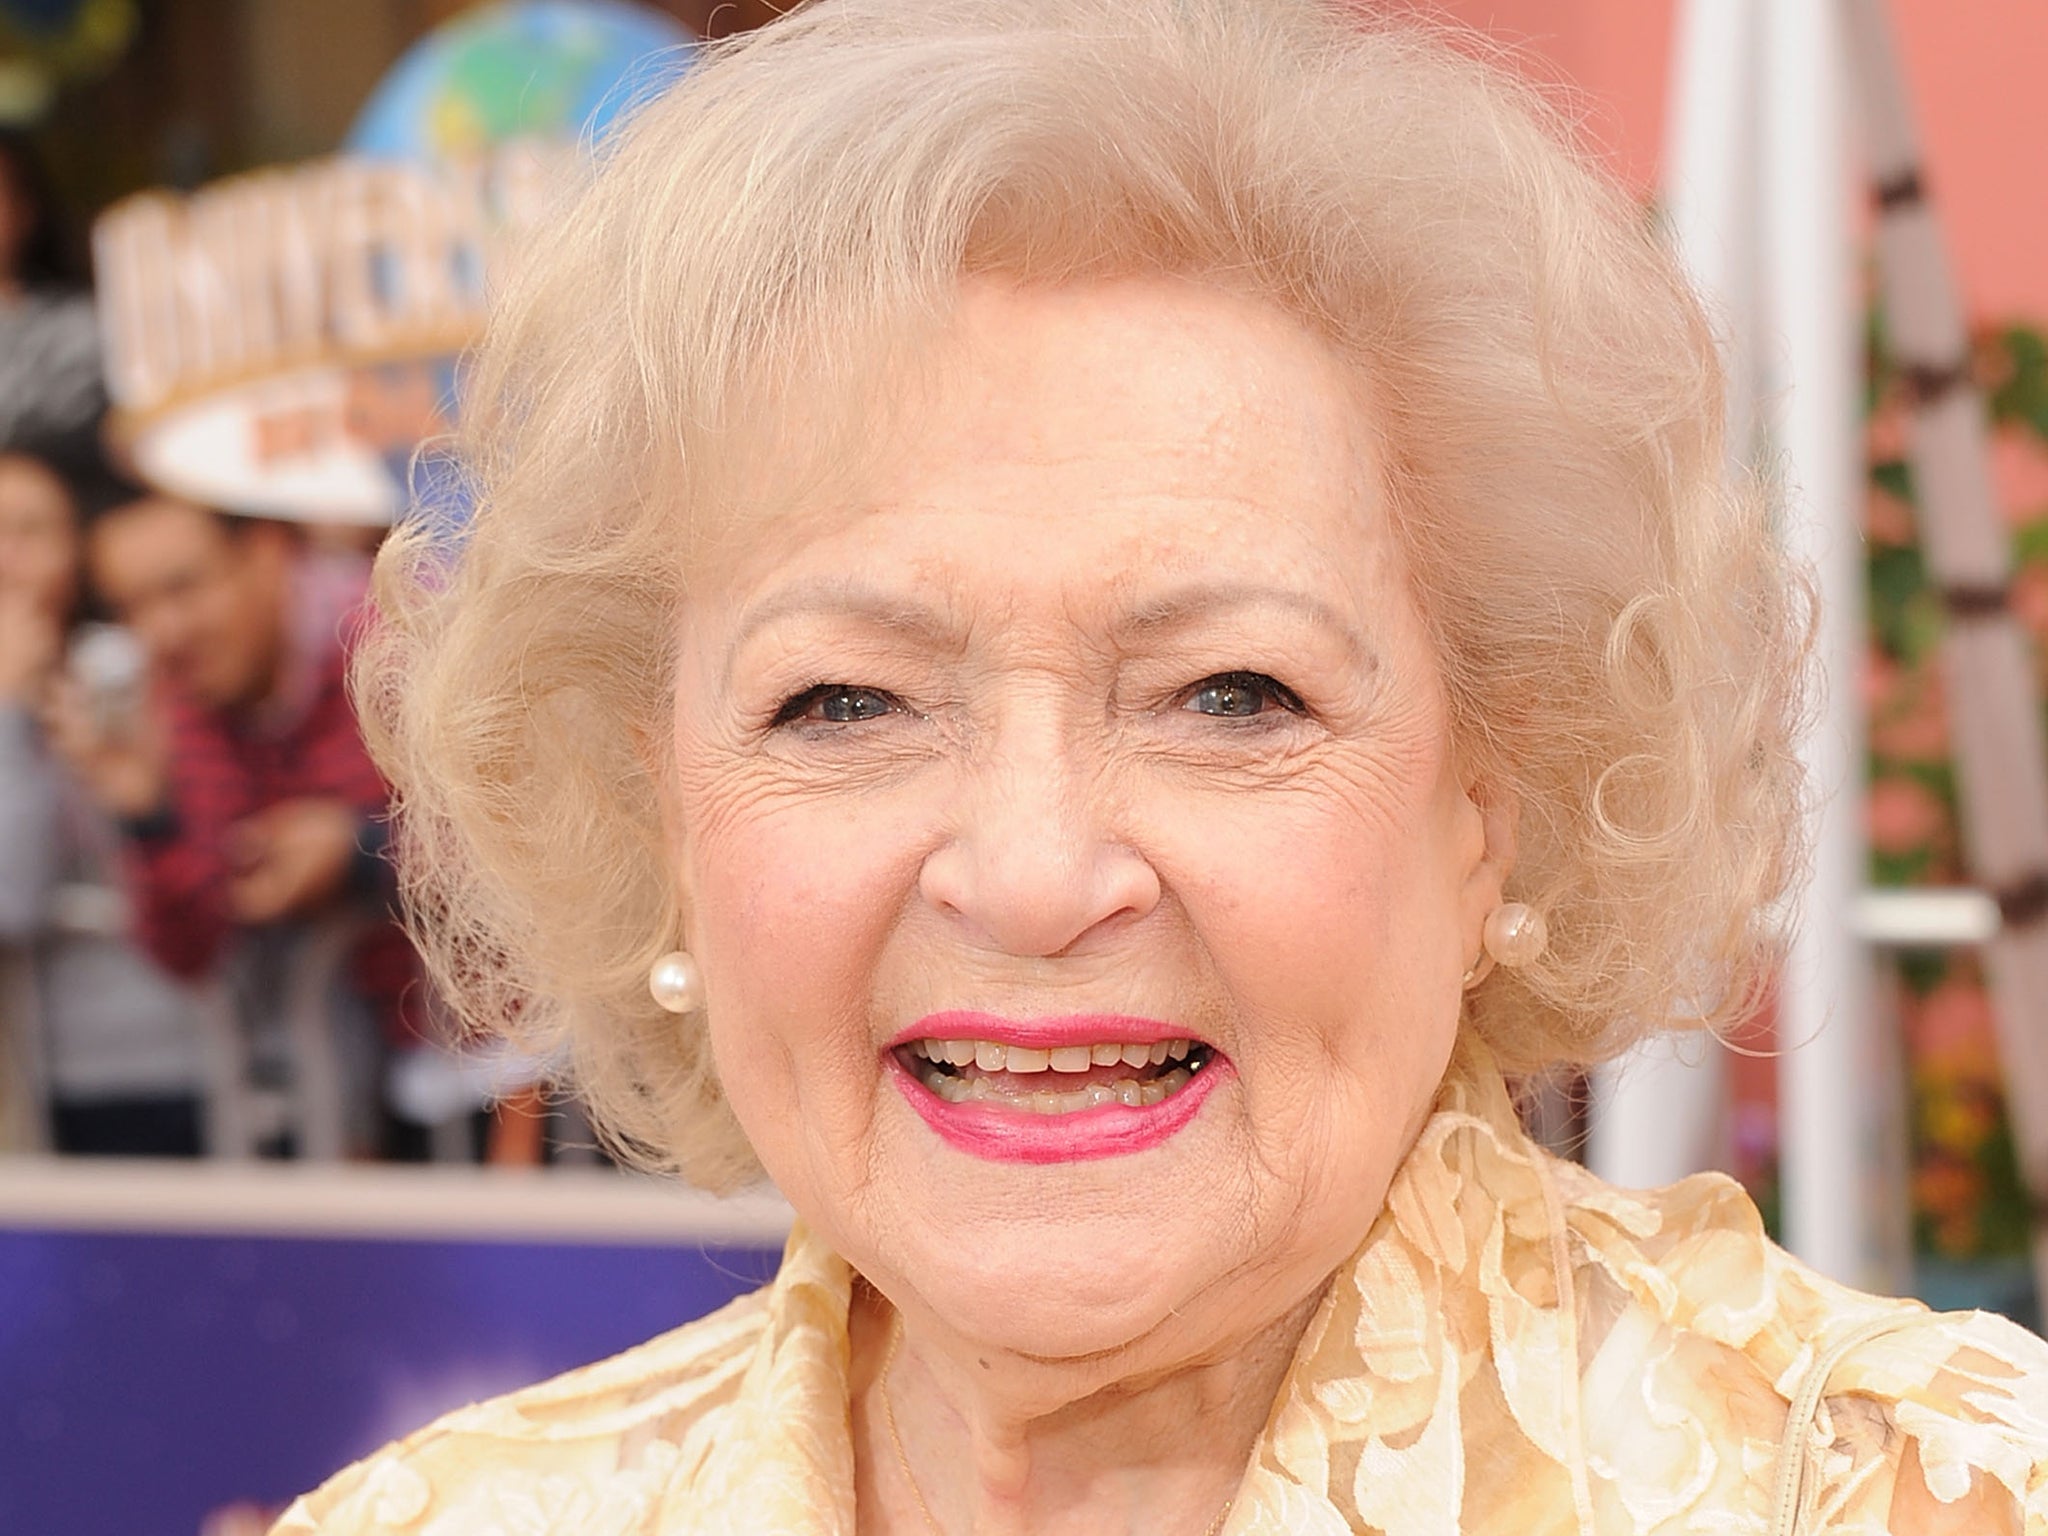 Betty White Death The Golden Girls Star And Tv Pioneer Dies At 99 The Independent